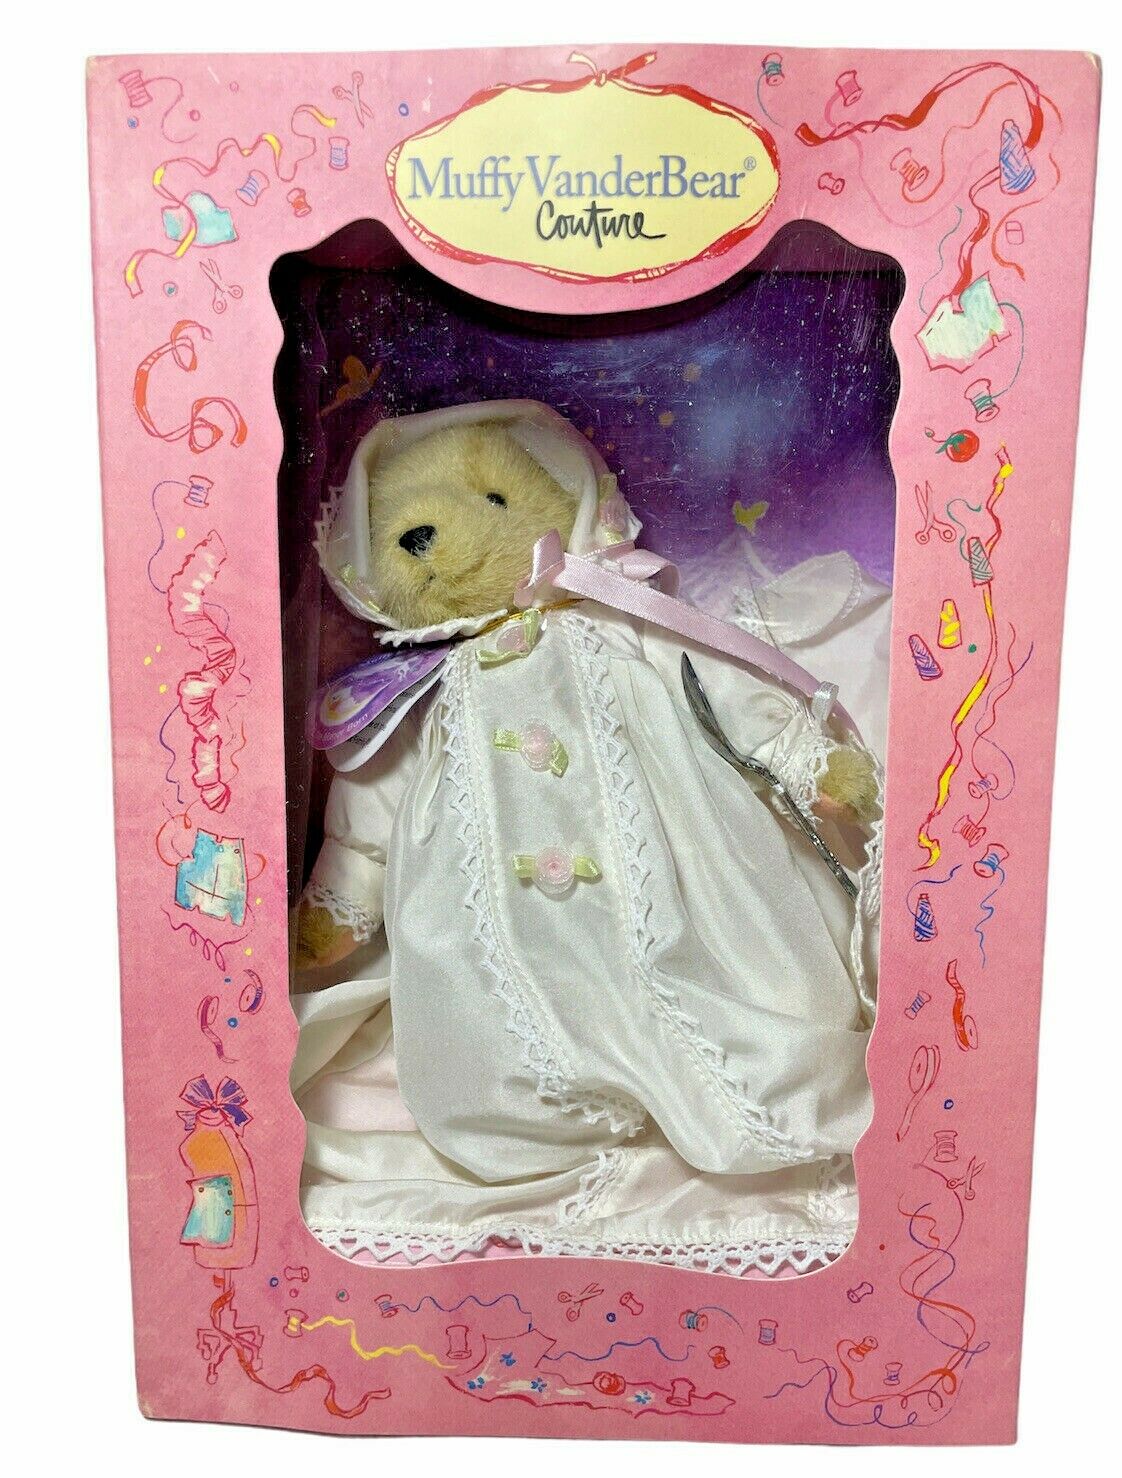 Muffy Vanderbear Dressed "to The Manor Born" | 2002 | With Silver Spoon | New